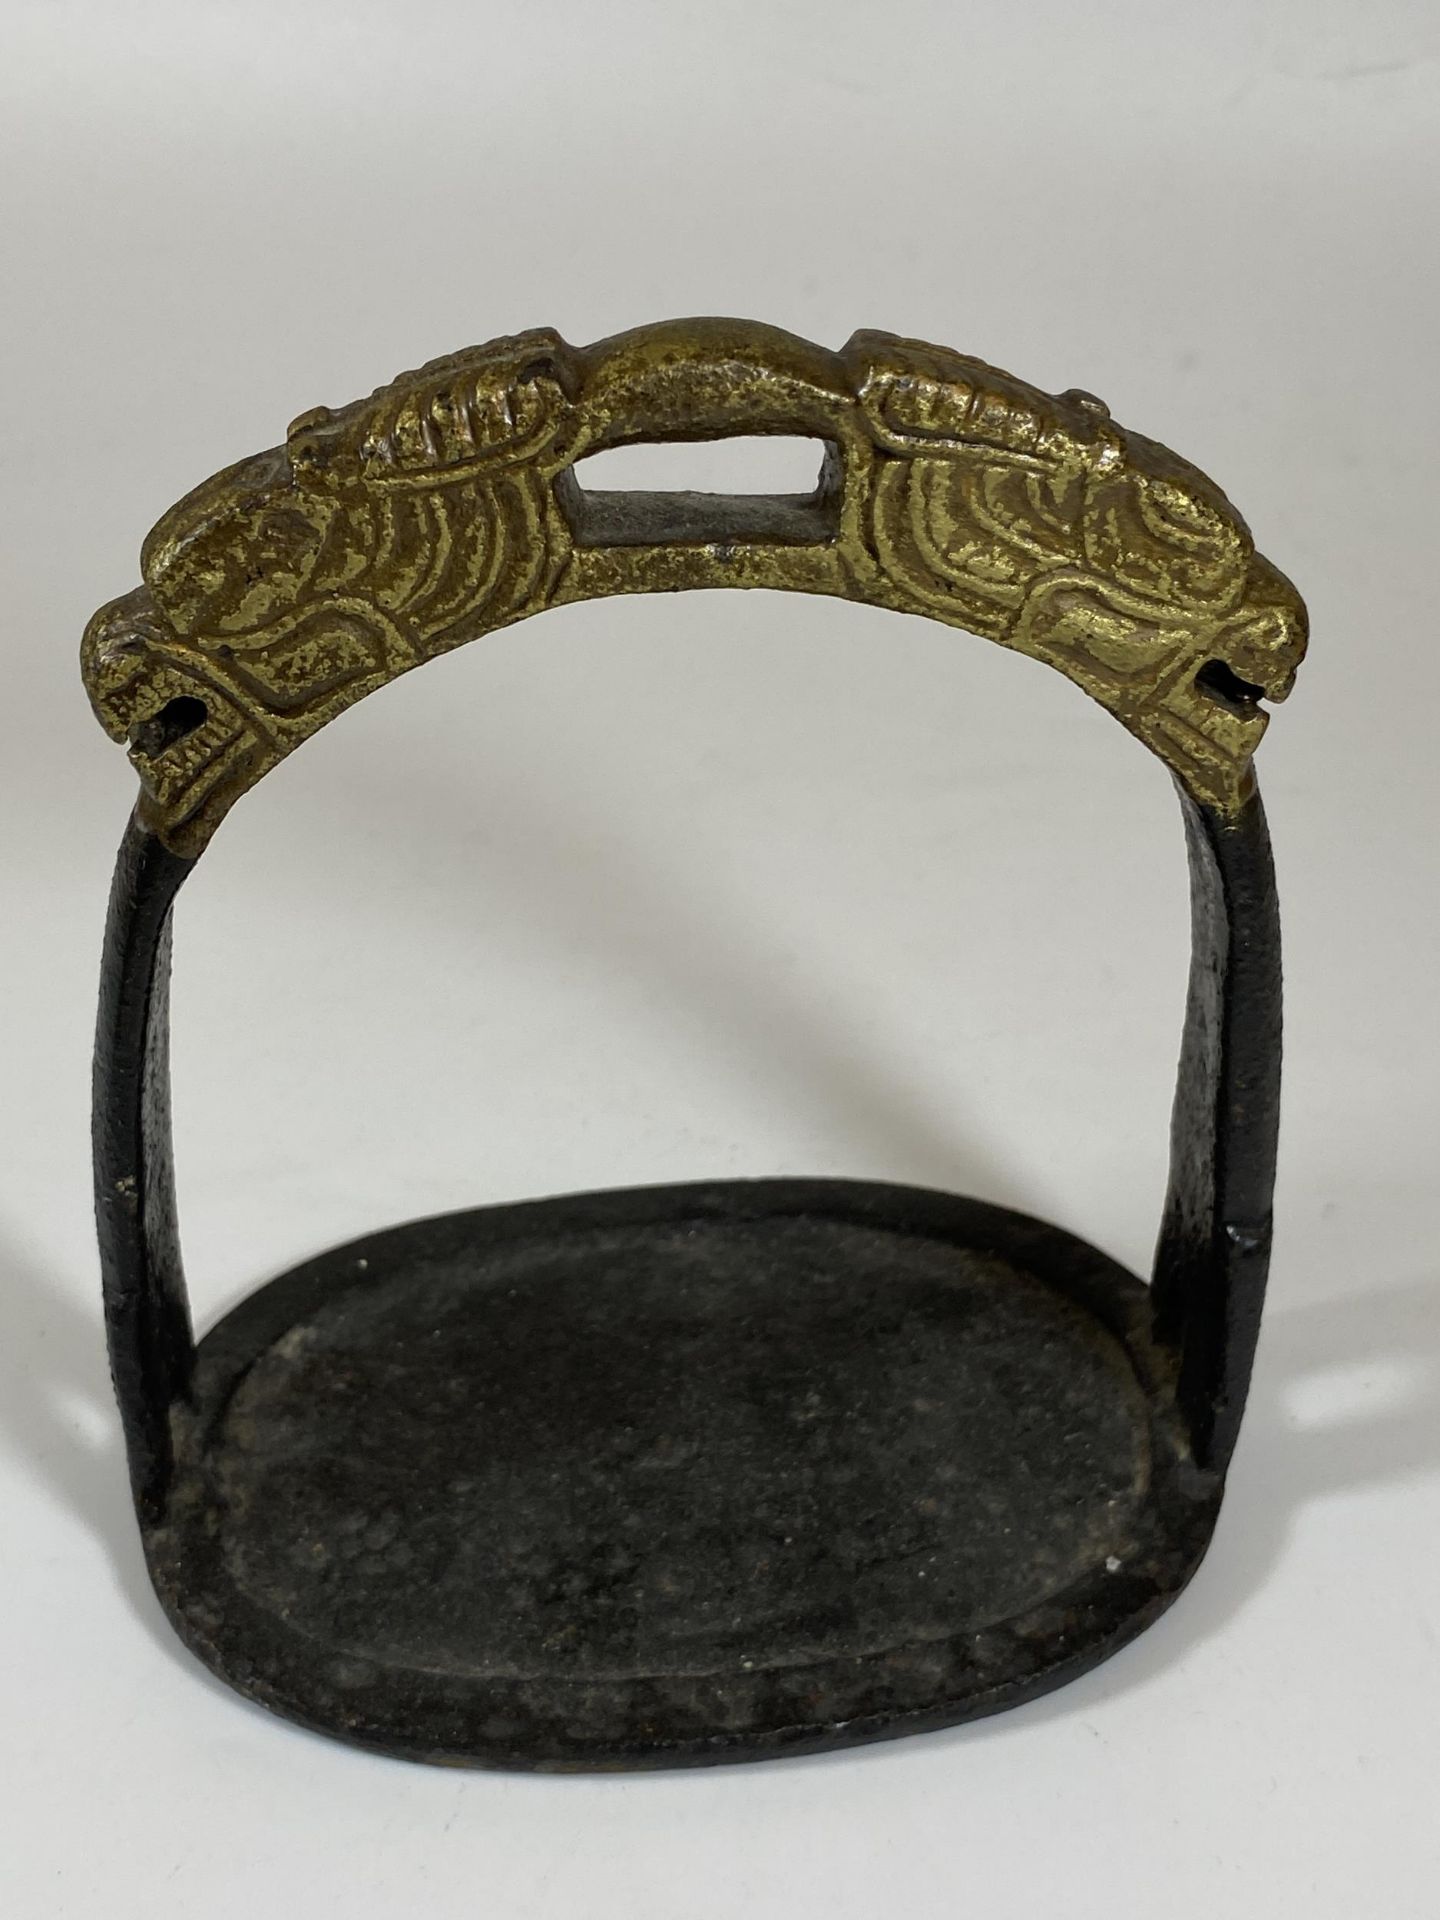 A SOLID CAST IRON ORIENTAL STIRRUP WITH DRAGON HEAD DESIGN, HEIGHT 15CM - Image 3 of 6